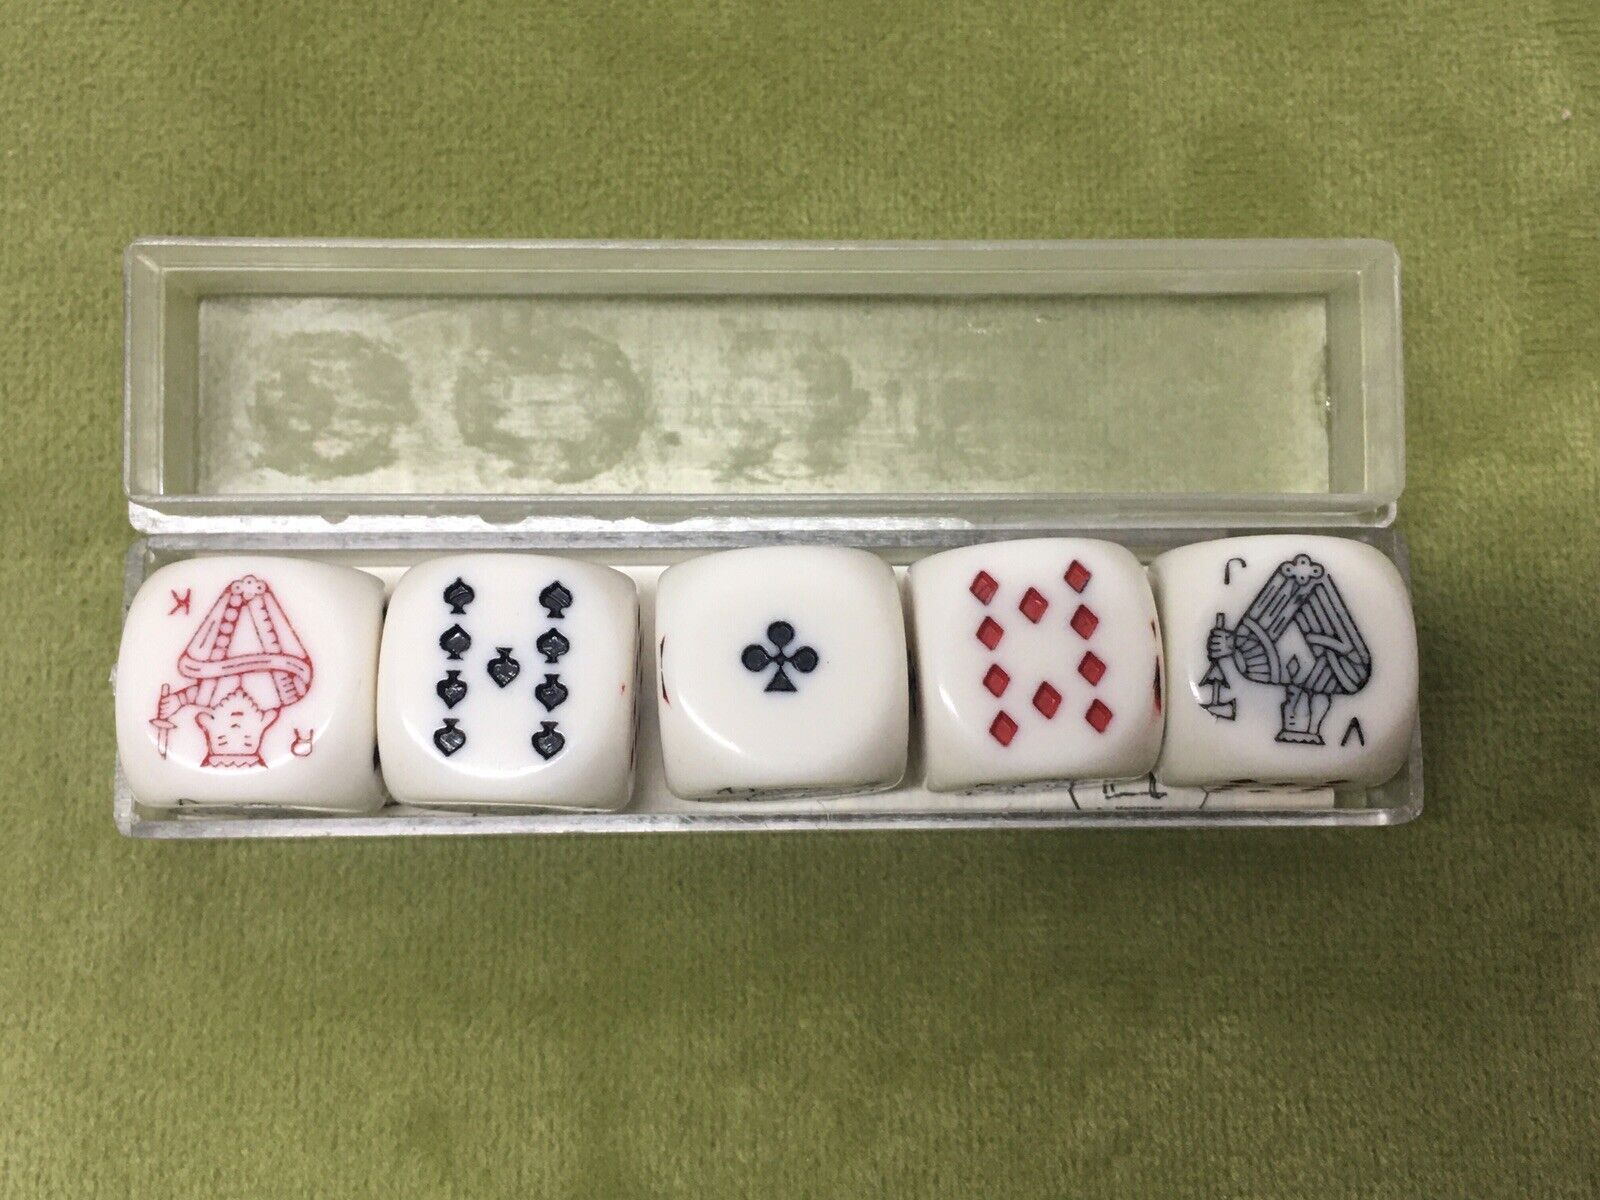 Vintage French Poker D'As Dice Game in Case, With Instructions/Rules